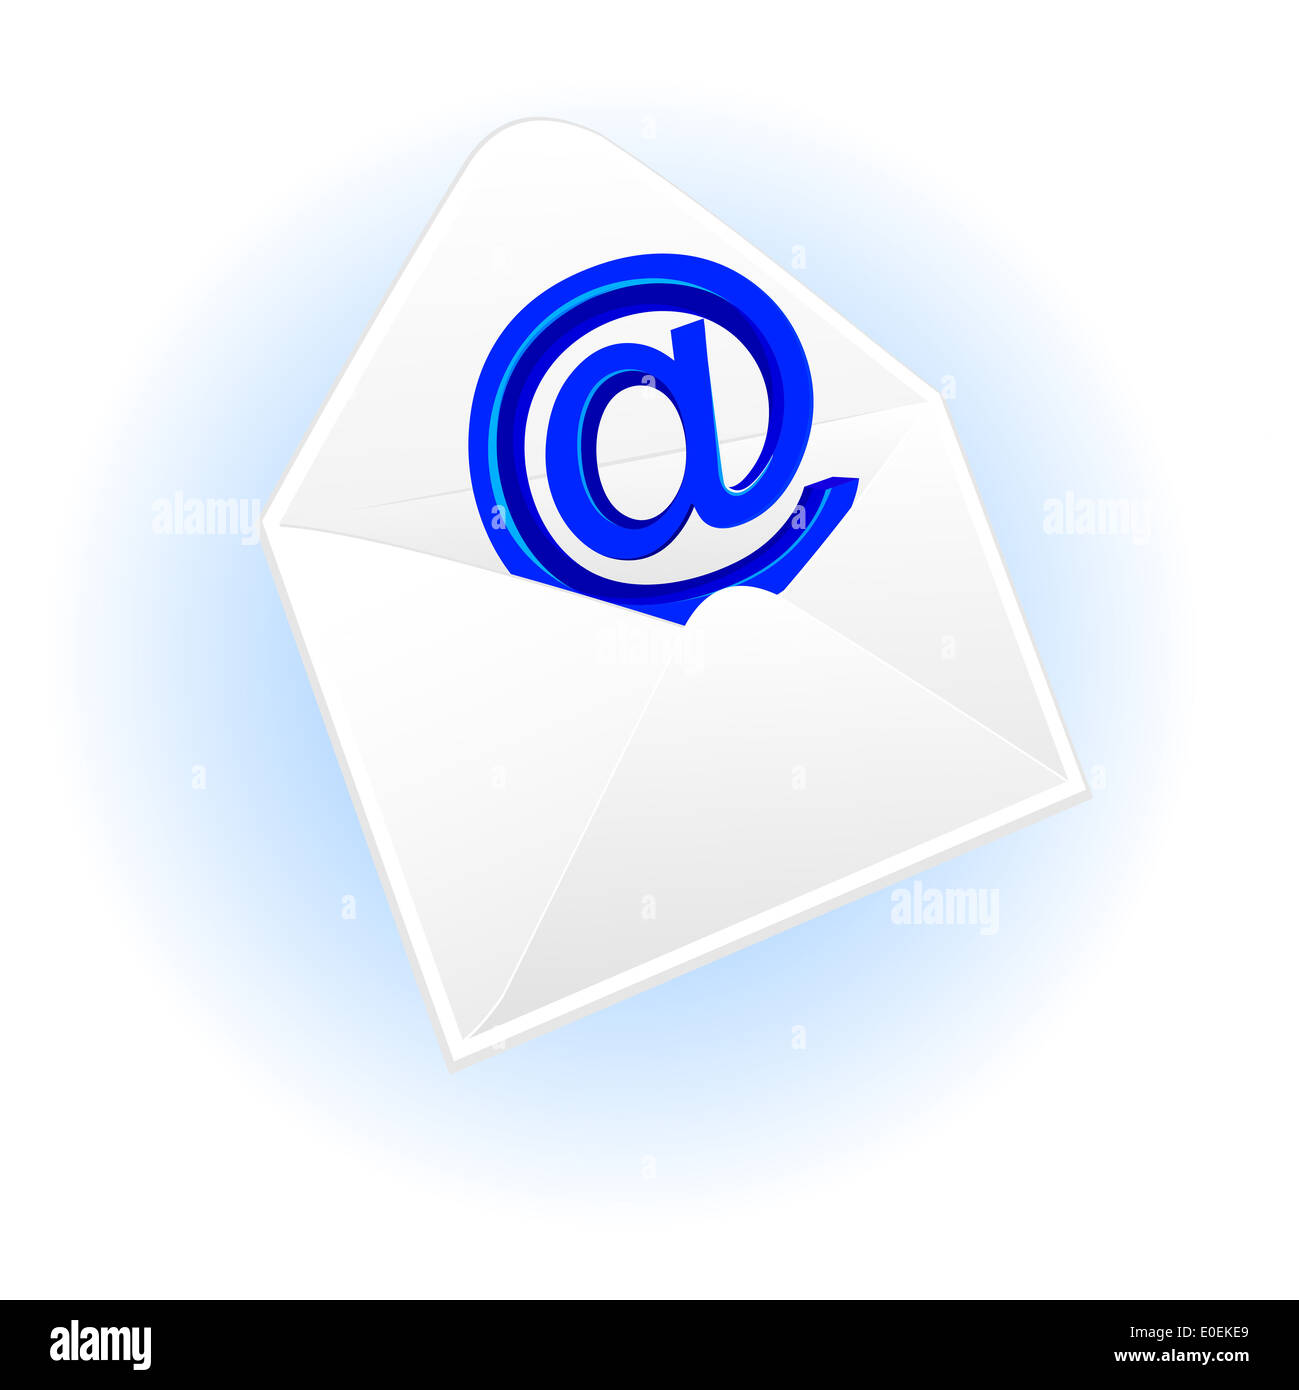 Envelope and email symbol Stock Photo